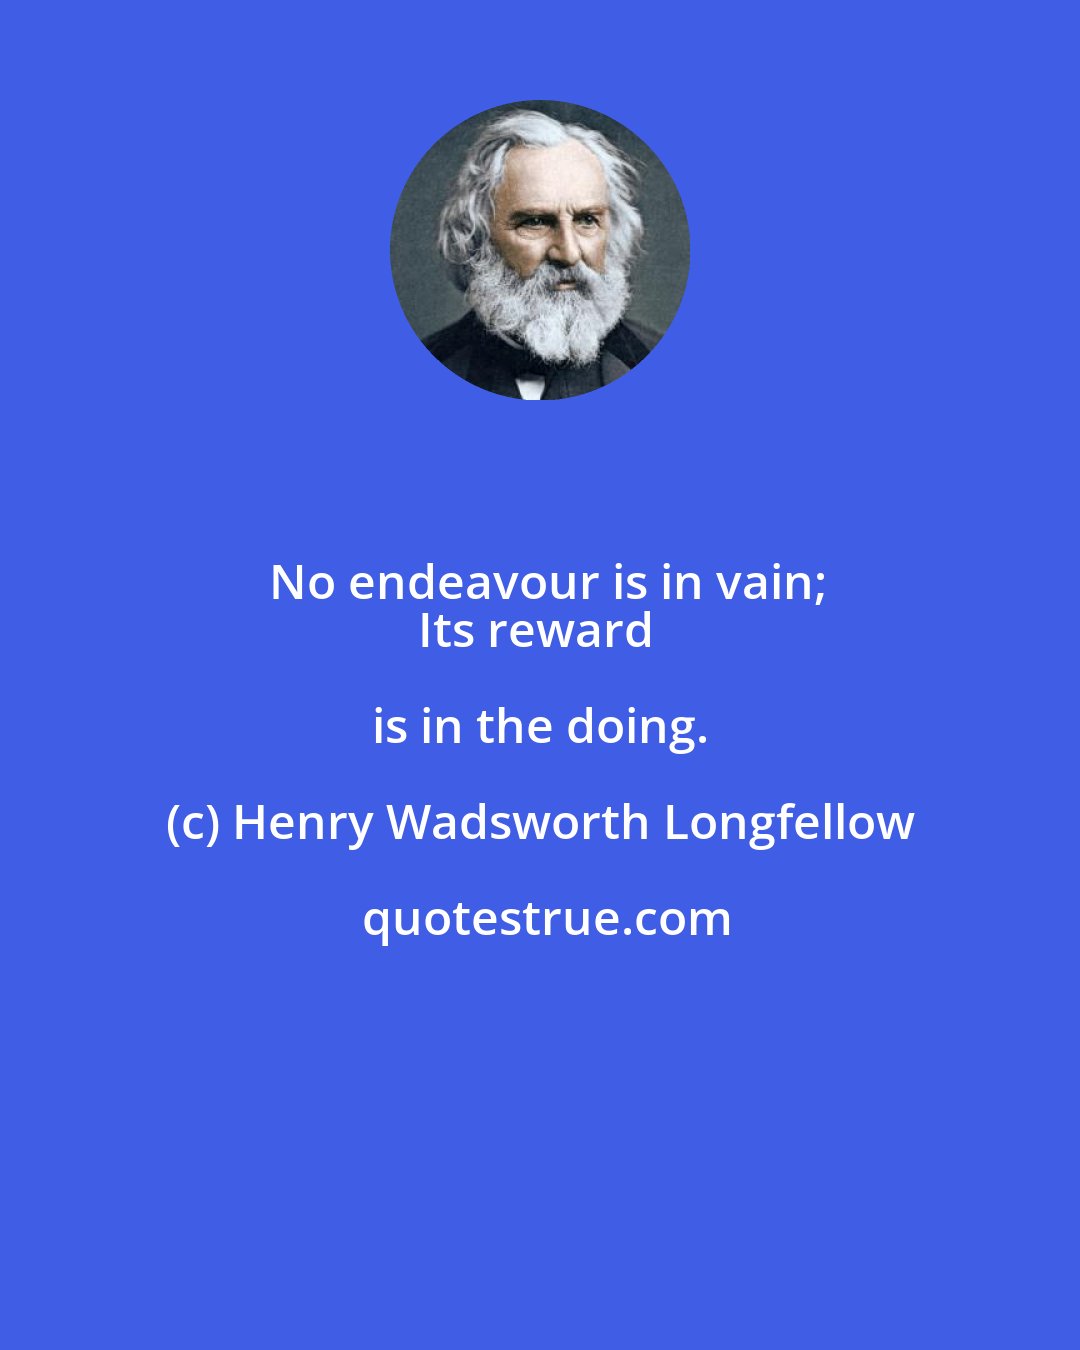 Henry Wadsworth Longfellow: No endeavour is in vain;
Its reward is in the doing.